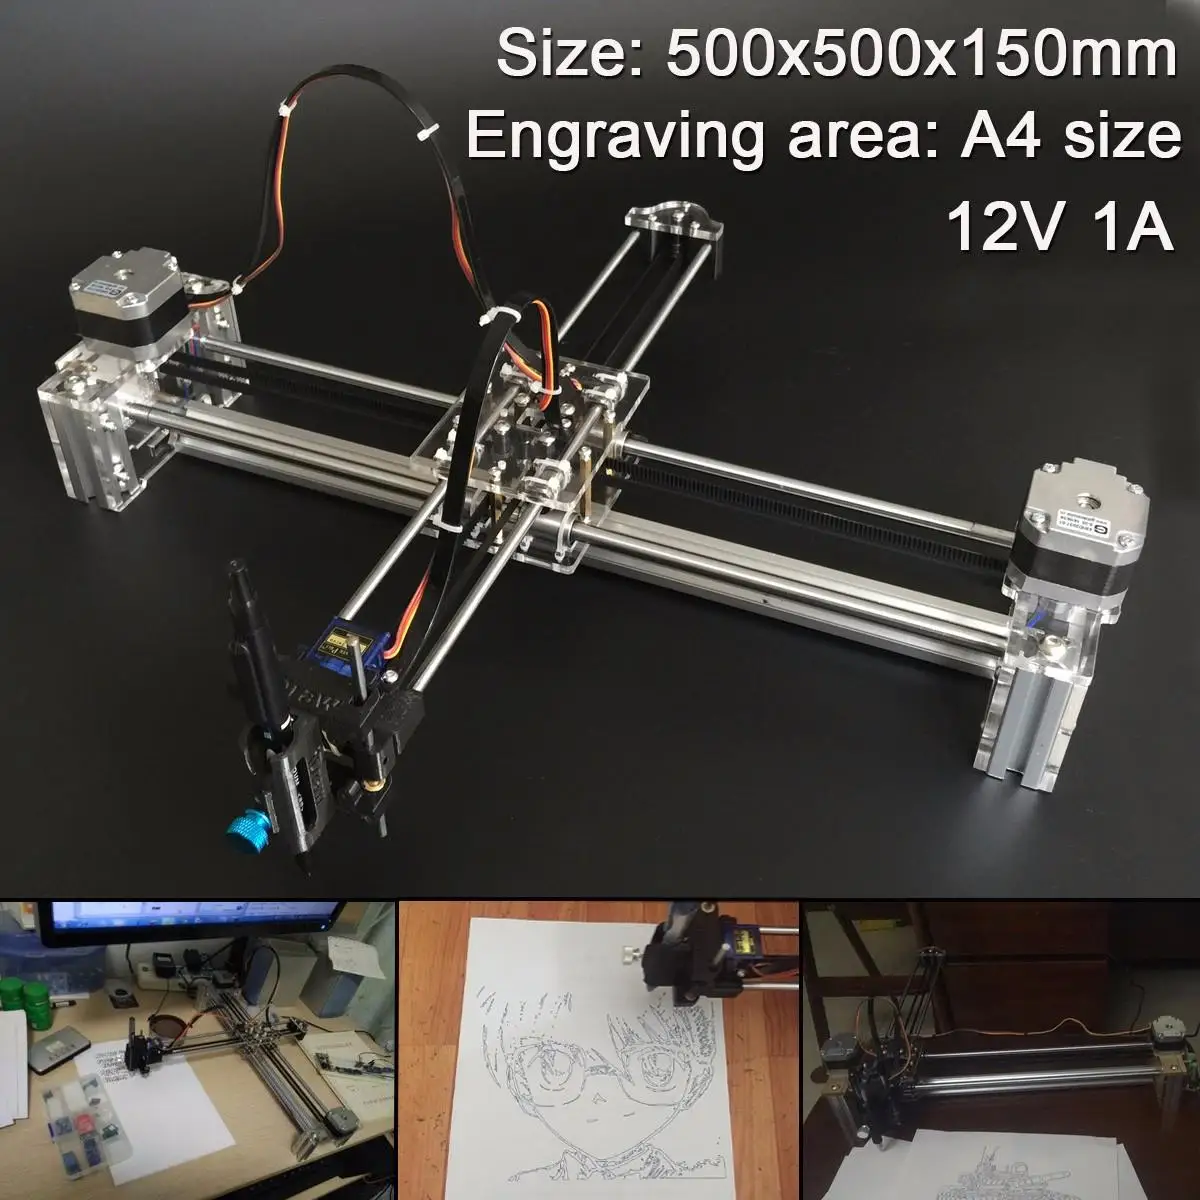 

New 2 Axis Writing Drawing Robot 1A 12V X Y Axis Drawing Laser Engraving Extended Writing Robot Printer Machine